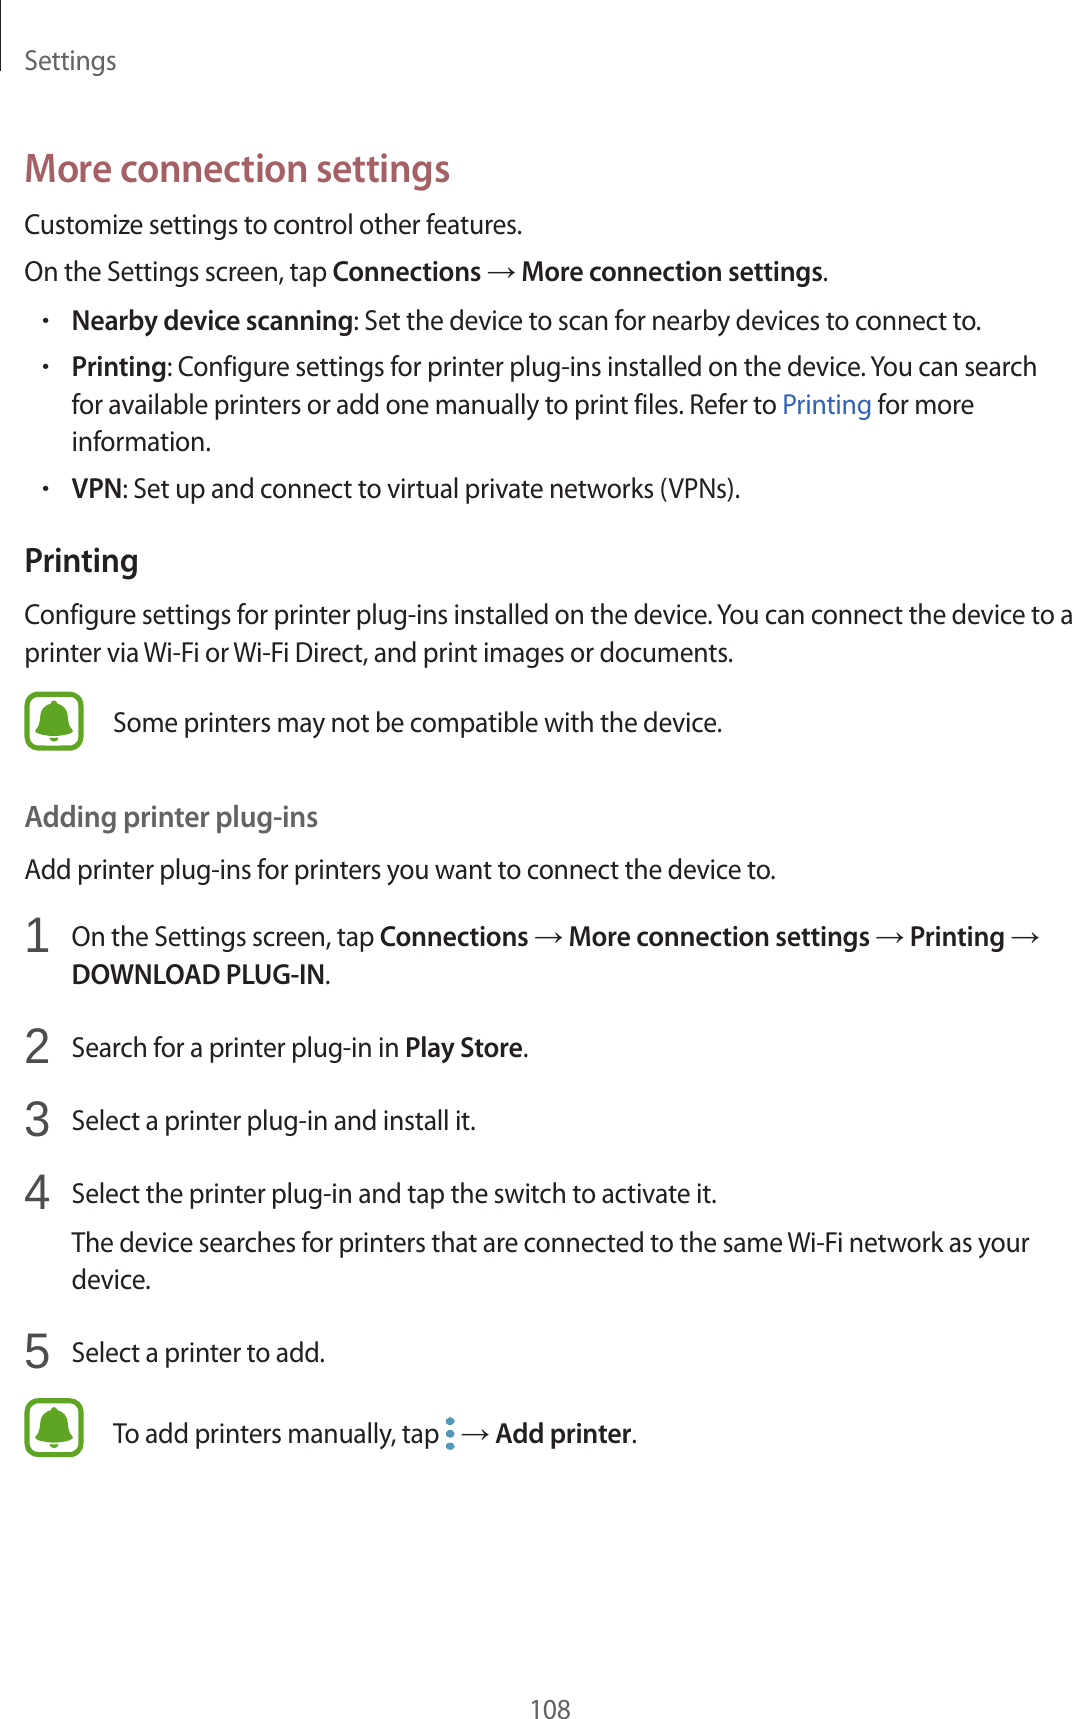 Settings108More connection settingsCustomize settings to control other features.On the Settings screen, tap Connections → More connection settings.•Nearby device scanning: Set the device to scan for nearby devices to connect to.•Printing: Configure settings for printer plug-ins installed on the device. You can search for available printers or add one manually to print files. Refer to Printing for more information.•VPN: Set up and connect to virtual private networks (VPNs).PrintingConfigure settings for printer plug-ins installed on the device. You can connect the device to a printer via Wi-Fi or Wi-Fi Direct, and print images or documents.Some printers may not be compatible with the device.Adding printer plug-insAdd printer plug-ins for printers you want to connect the device to.1  On the Settings screen, tap Connections → More connection settings → Printing → DOWNLOAD PLUG-IN.2  Search for a printer plug-in in Play Store.3  Select a printer plug-in and install it.4  Select the printer plug-in and tap the switch to activate it.The device searches for printers that are connected to the same Wi-Fi network as your device.5  Select a printer to add.To add printers manually, tap   → Add printer.